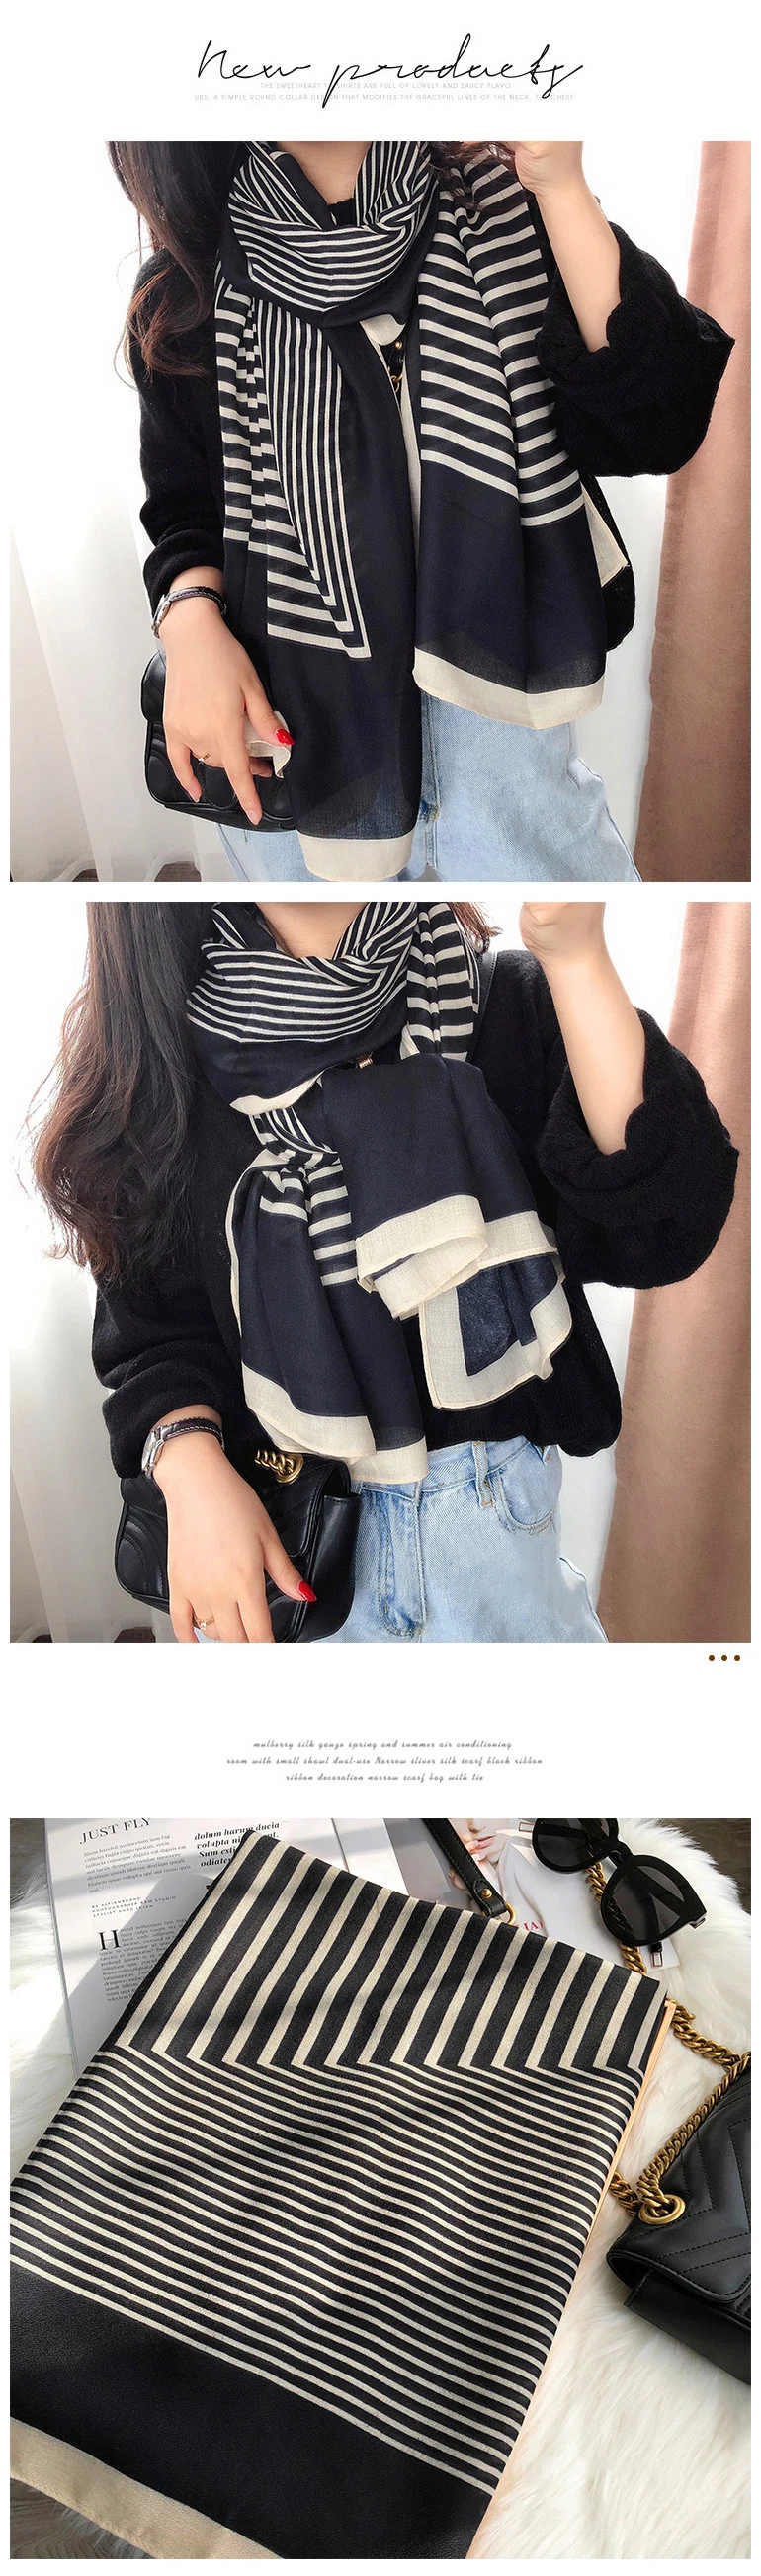 Women Fashion Scarves Big Brand Design Print Lady Poly Silk Shawl Cotton Stole Scarf for Girls with Letter Stripes